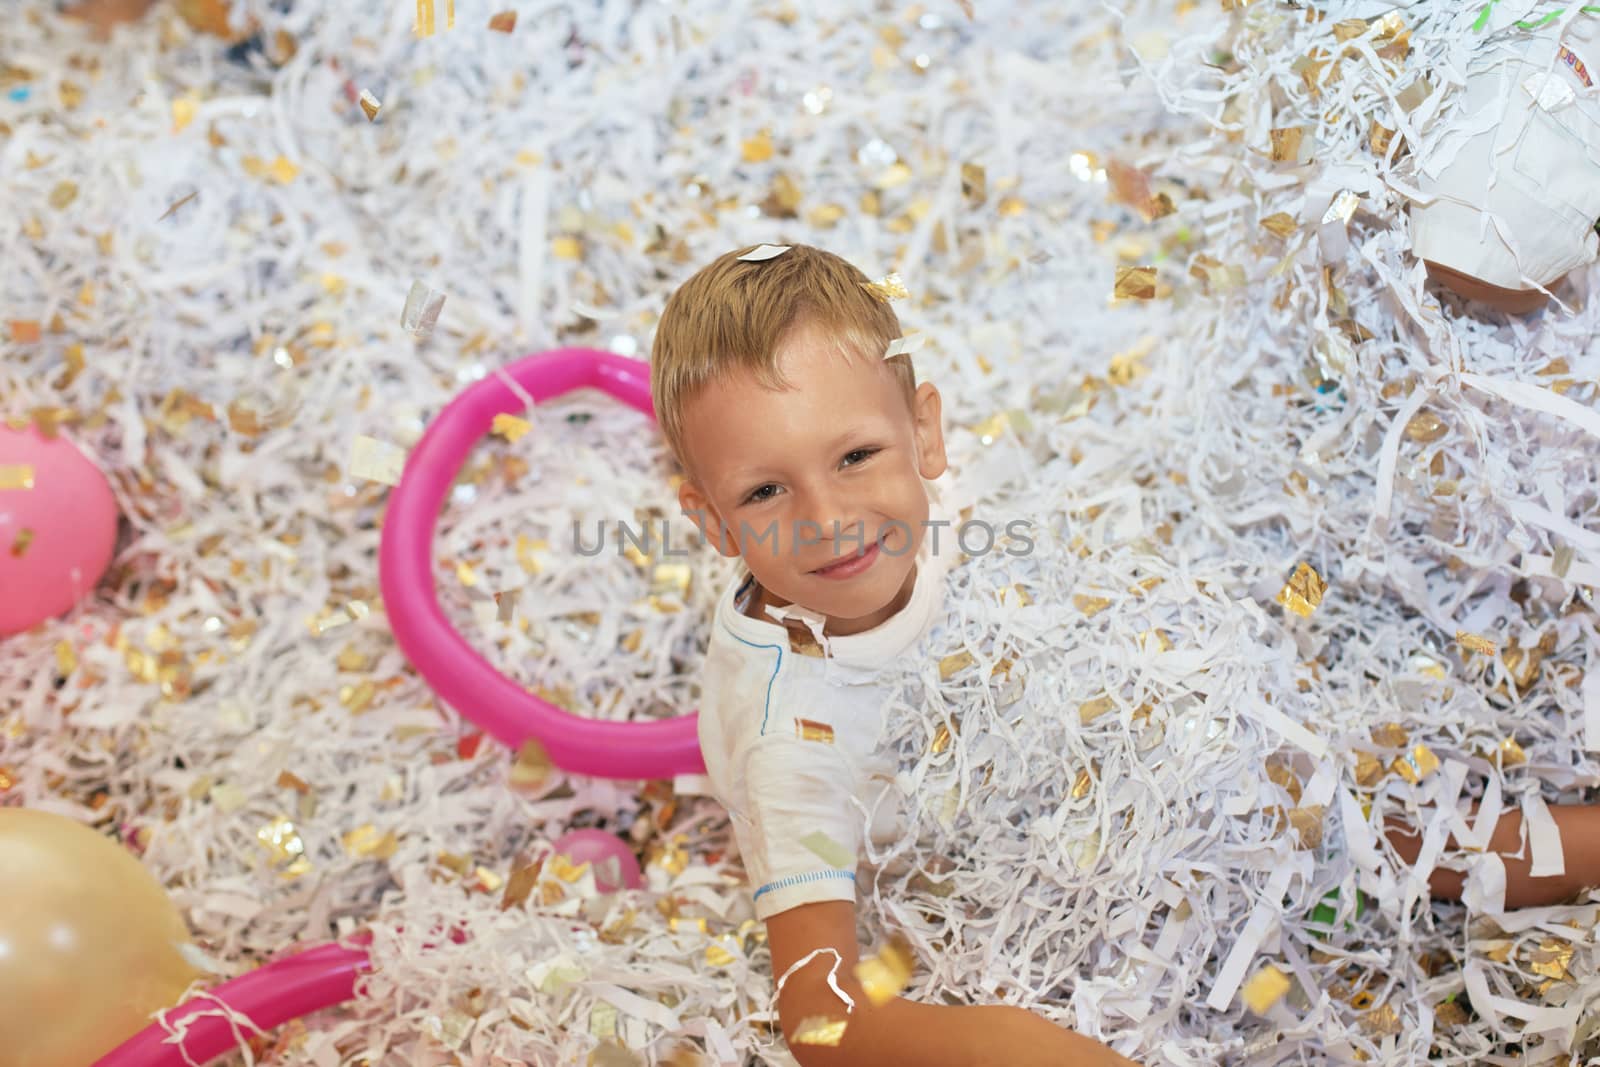 Little boy jumping and having fun celebrating birthday. Portrait of a child throws up multi-colored tinsel and paper confetti. Kids party. Happy excited laughing kid under sparkling confetti shower